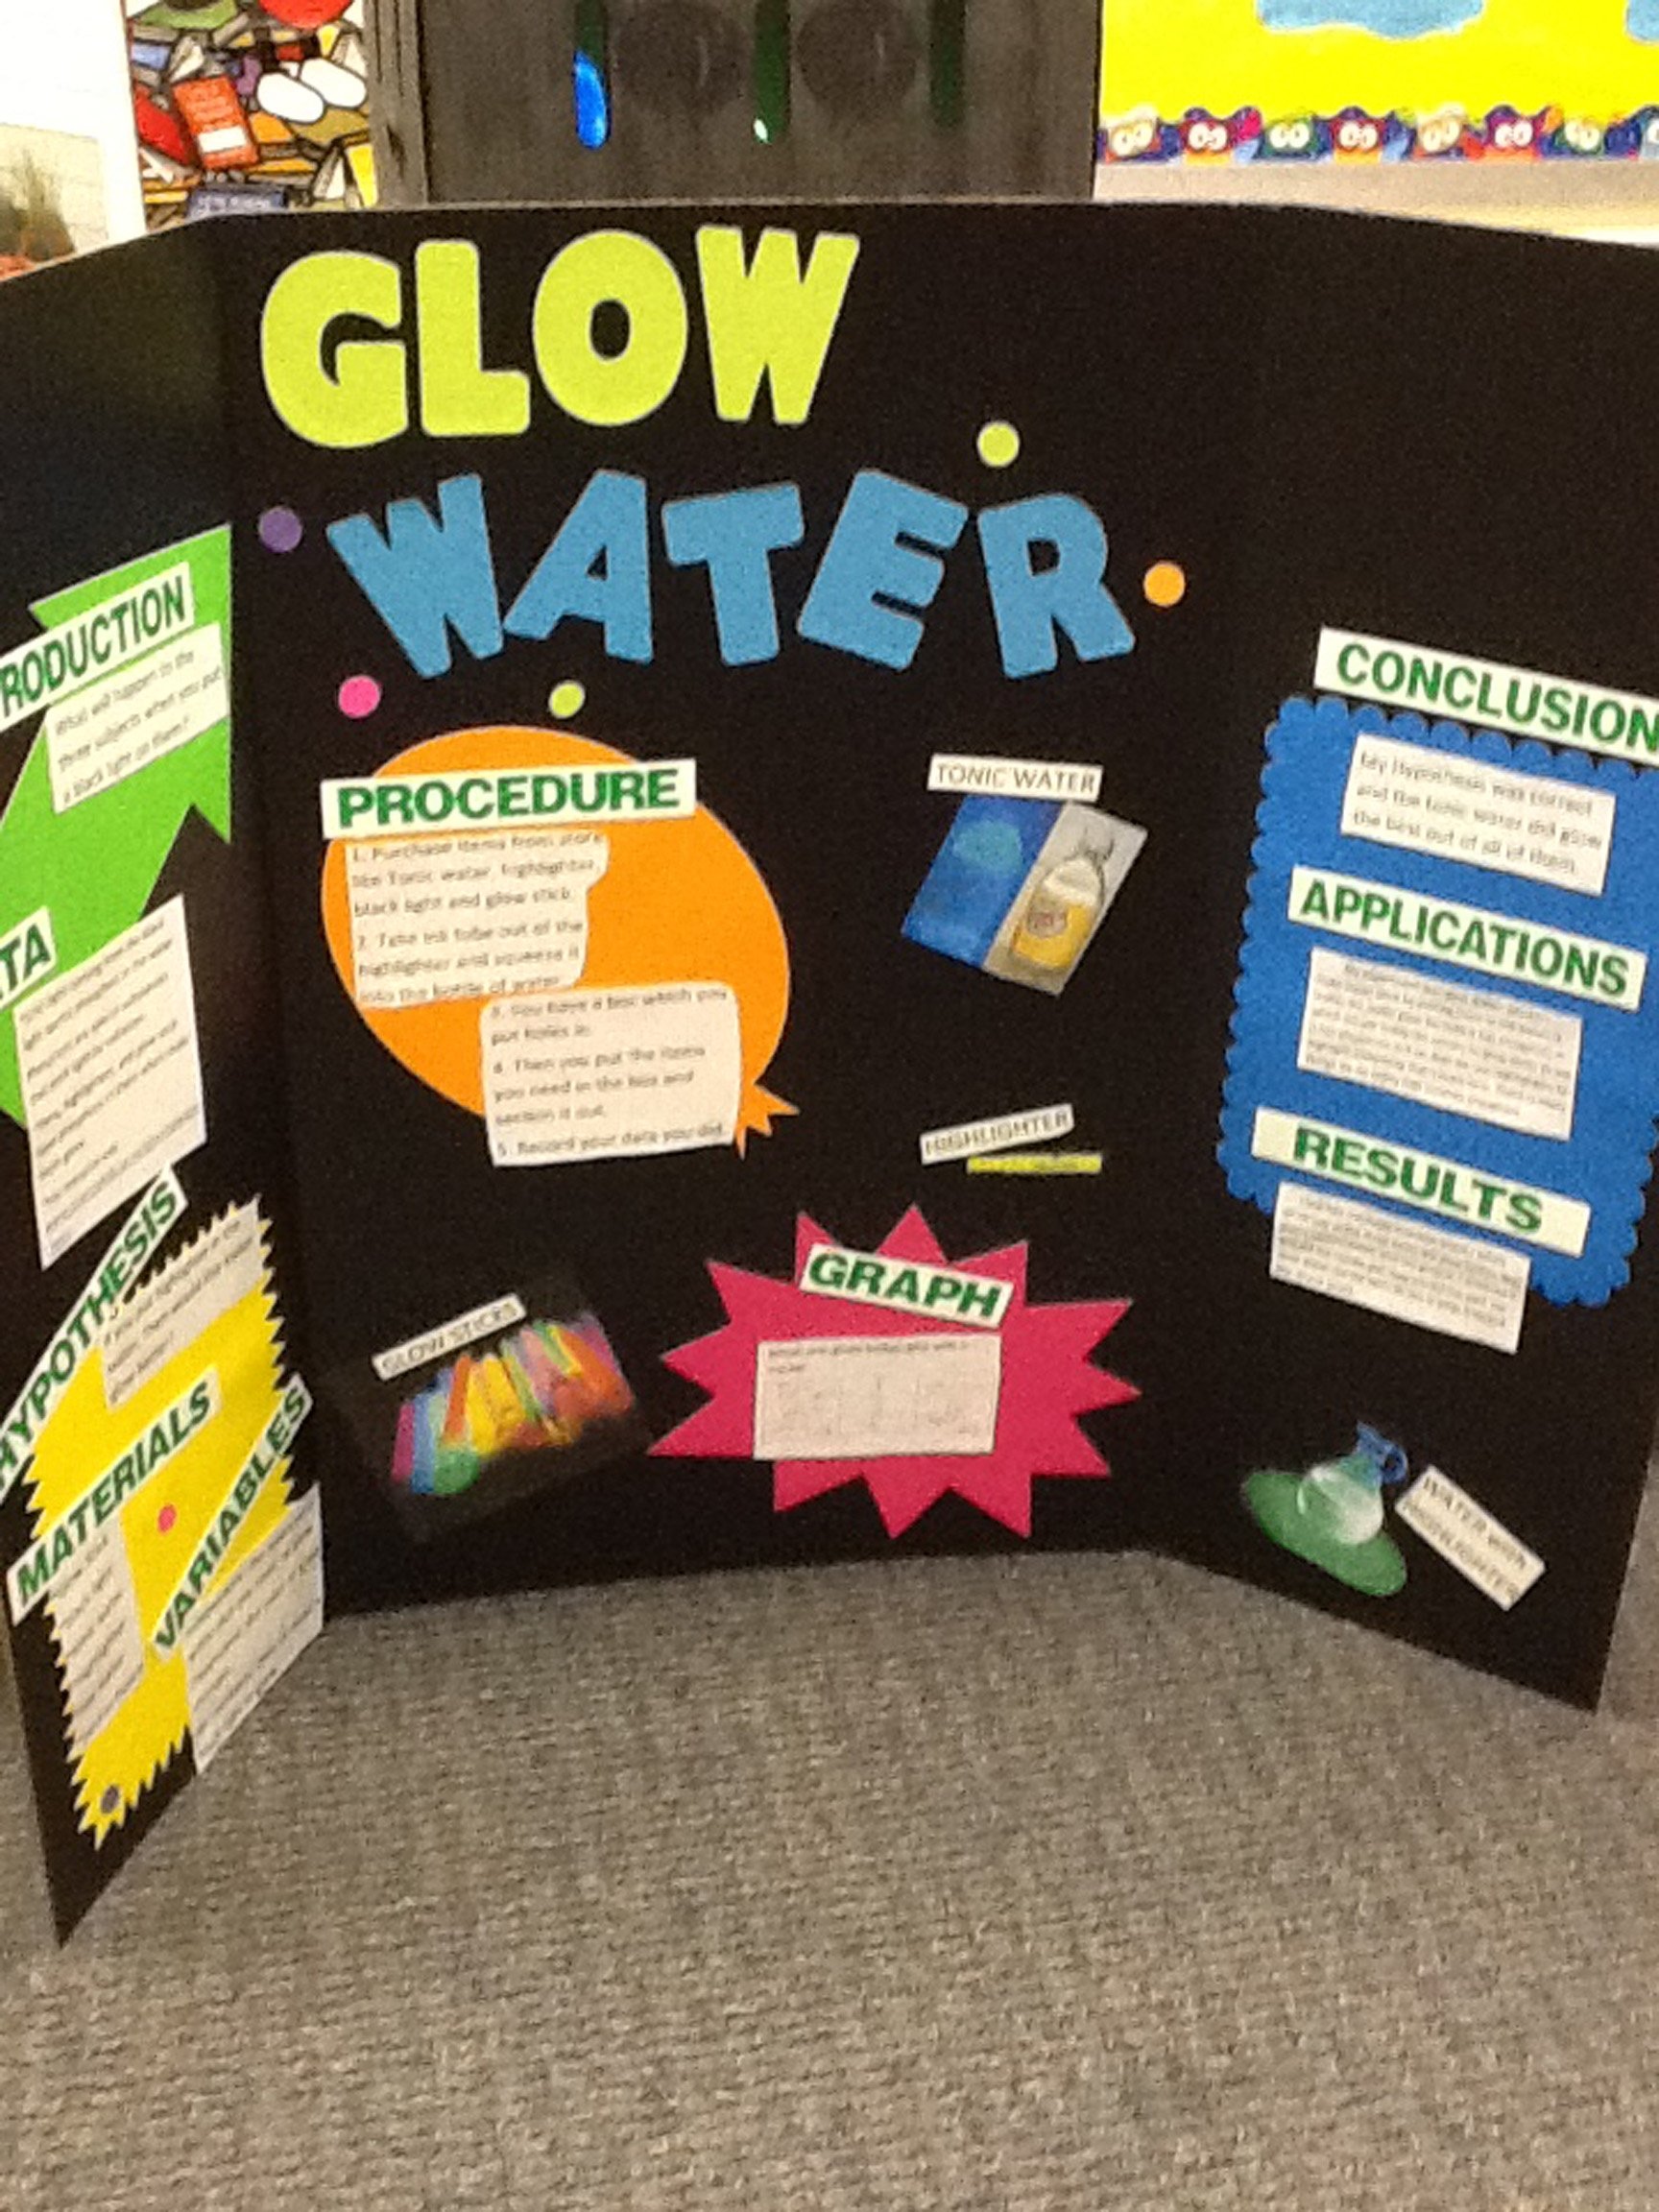 10 Stunning Science Fair Project Ideas For 6Th Graders sixth grade science fair projects coursework academic service 10 2022